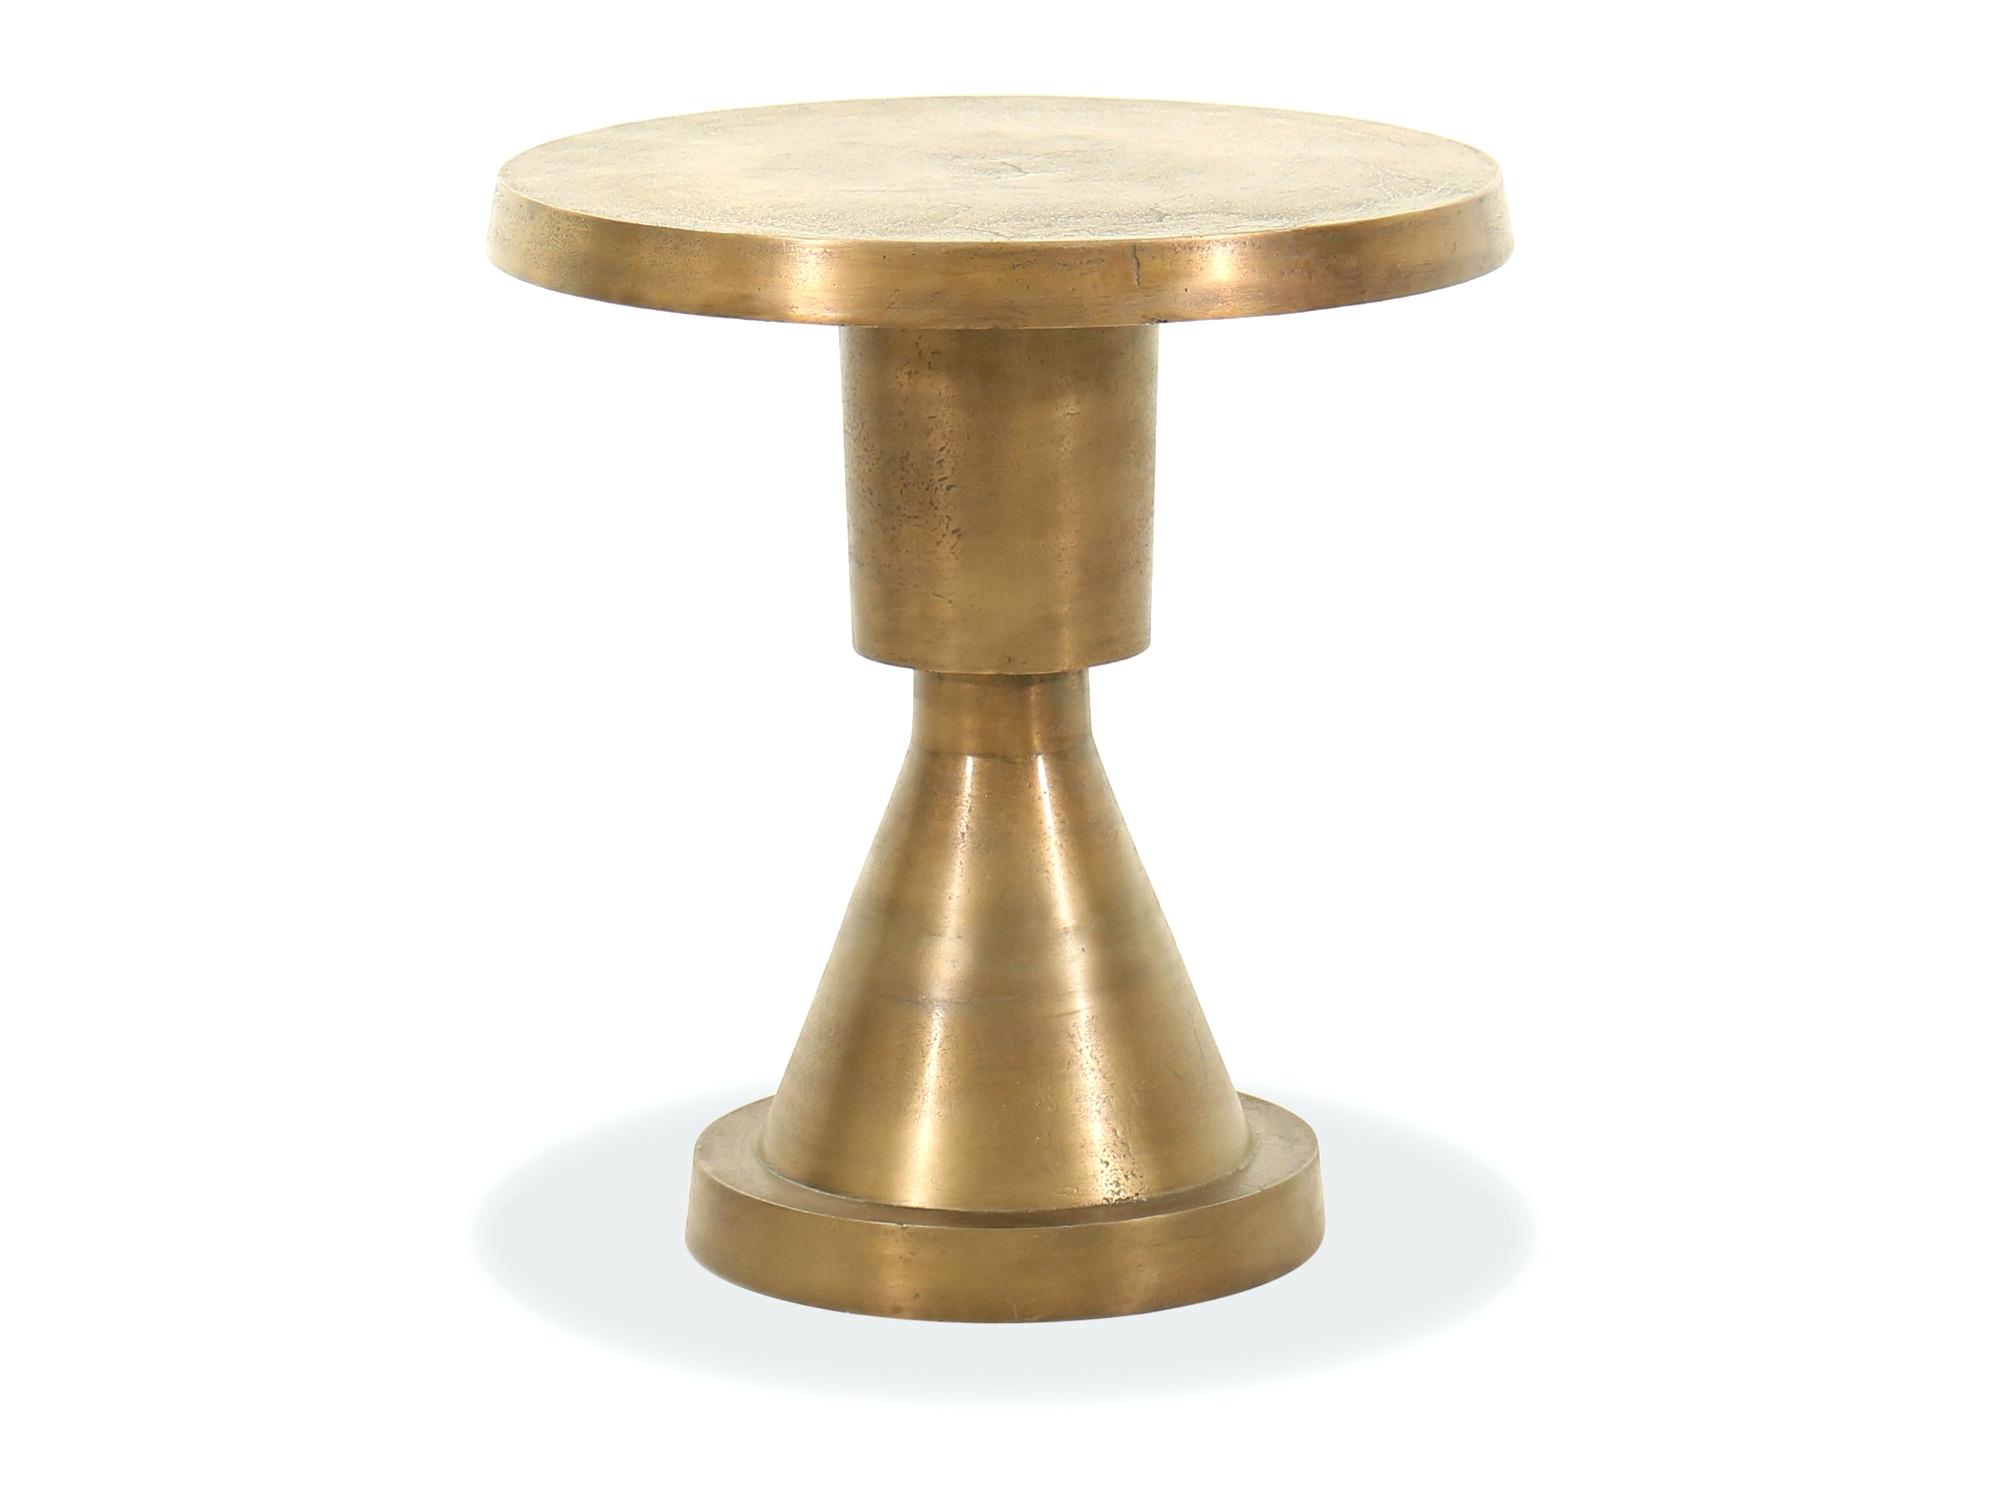 metal accent tables bronze kitchenaid service centre kitchener road mrt kitchen food rebel address design conical base aluminum table gold brothers furniture adorable full size